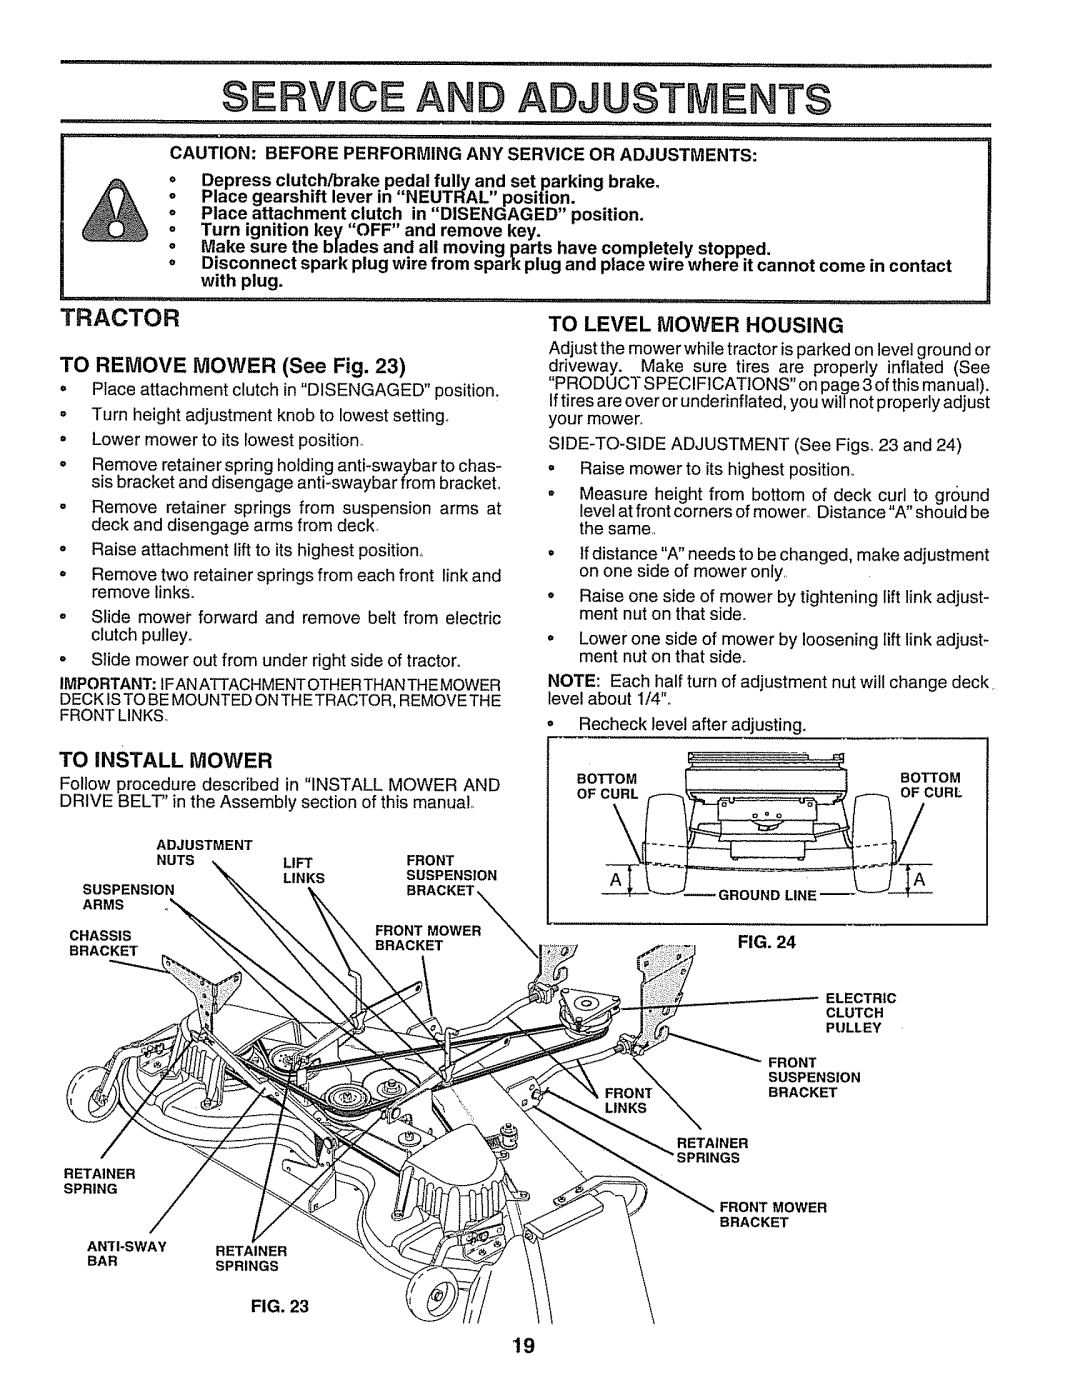 Sears 917.25597 Service And Adjustments, Tractor, TO REMOVE MOWER See Fig, To Level Mower Housing, To Install Mower 